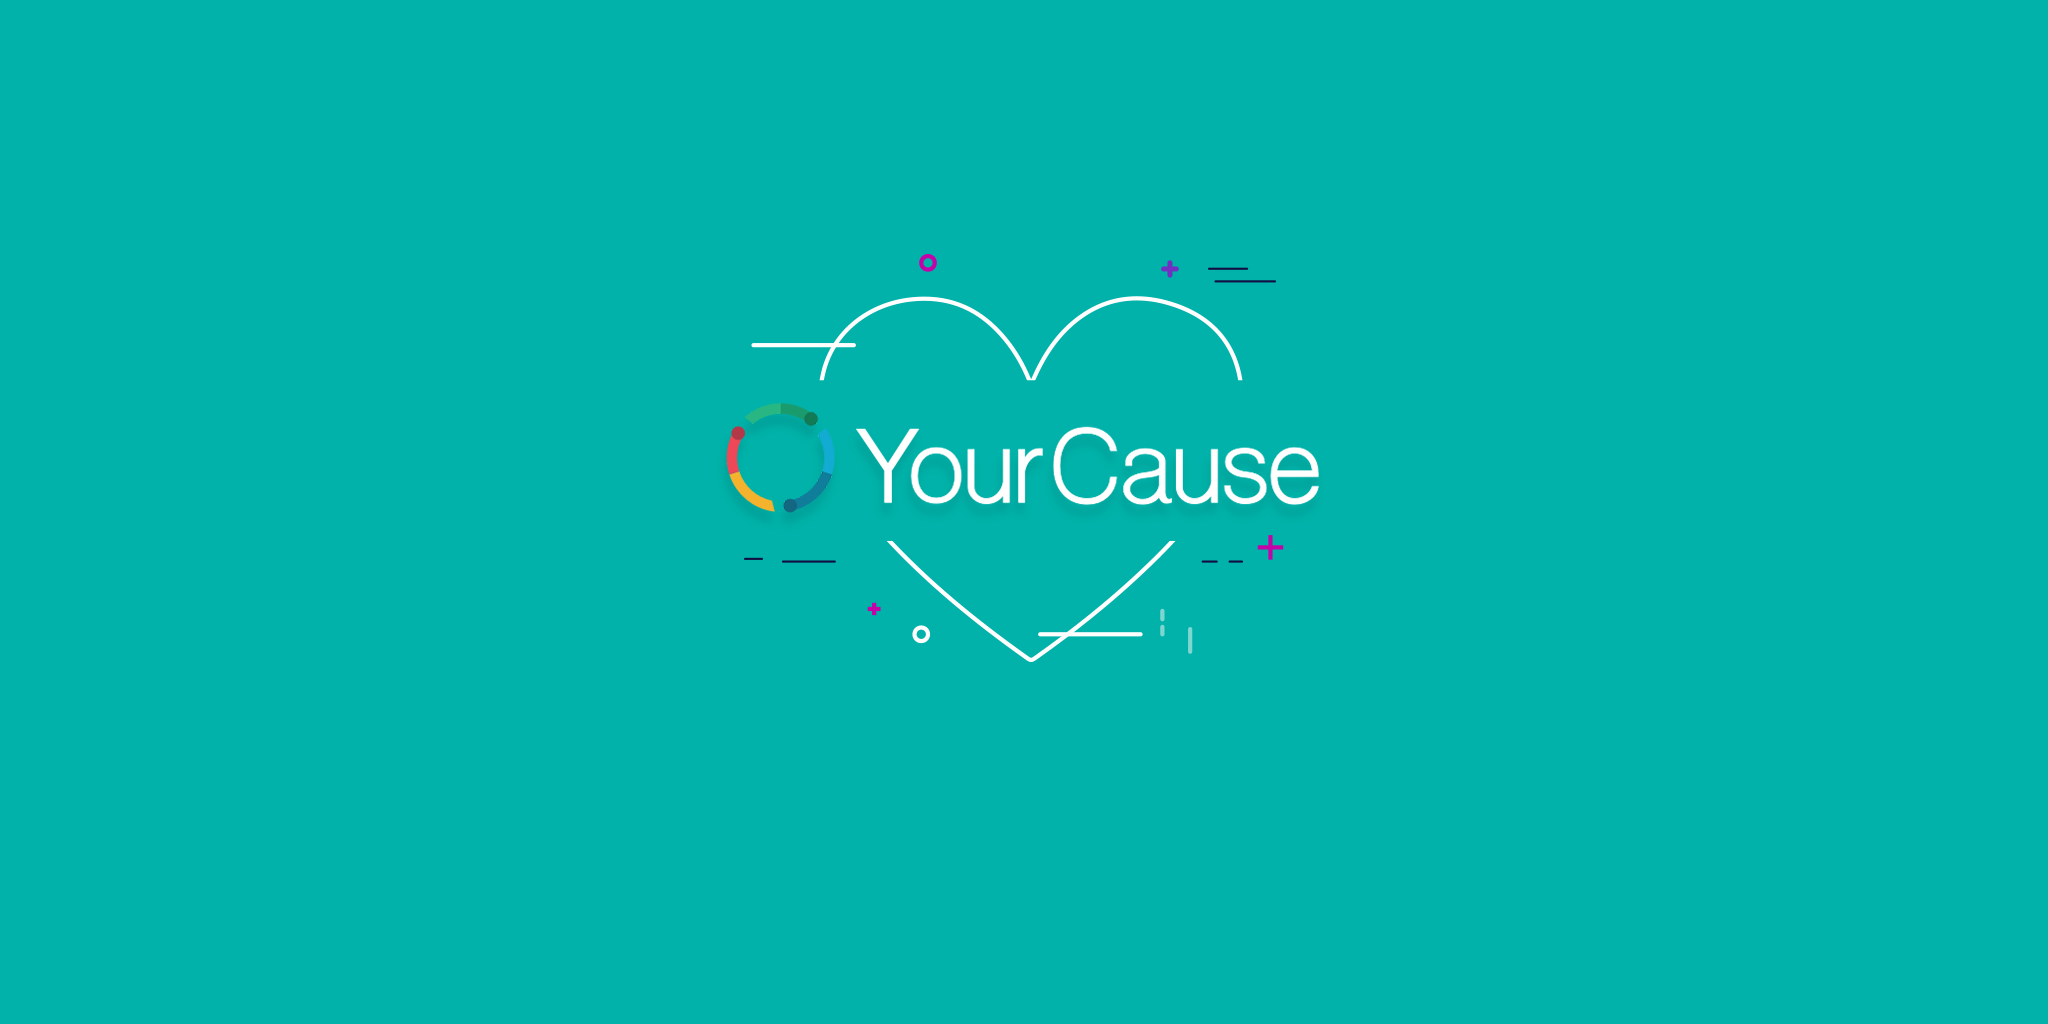 Employee Donations Through YourCause - DoubleVerify